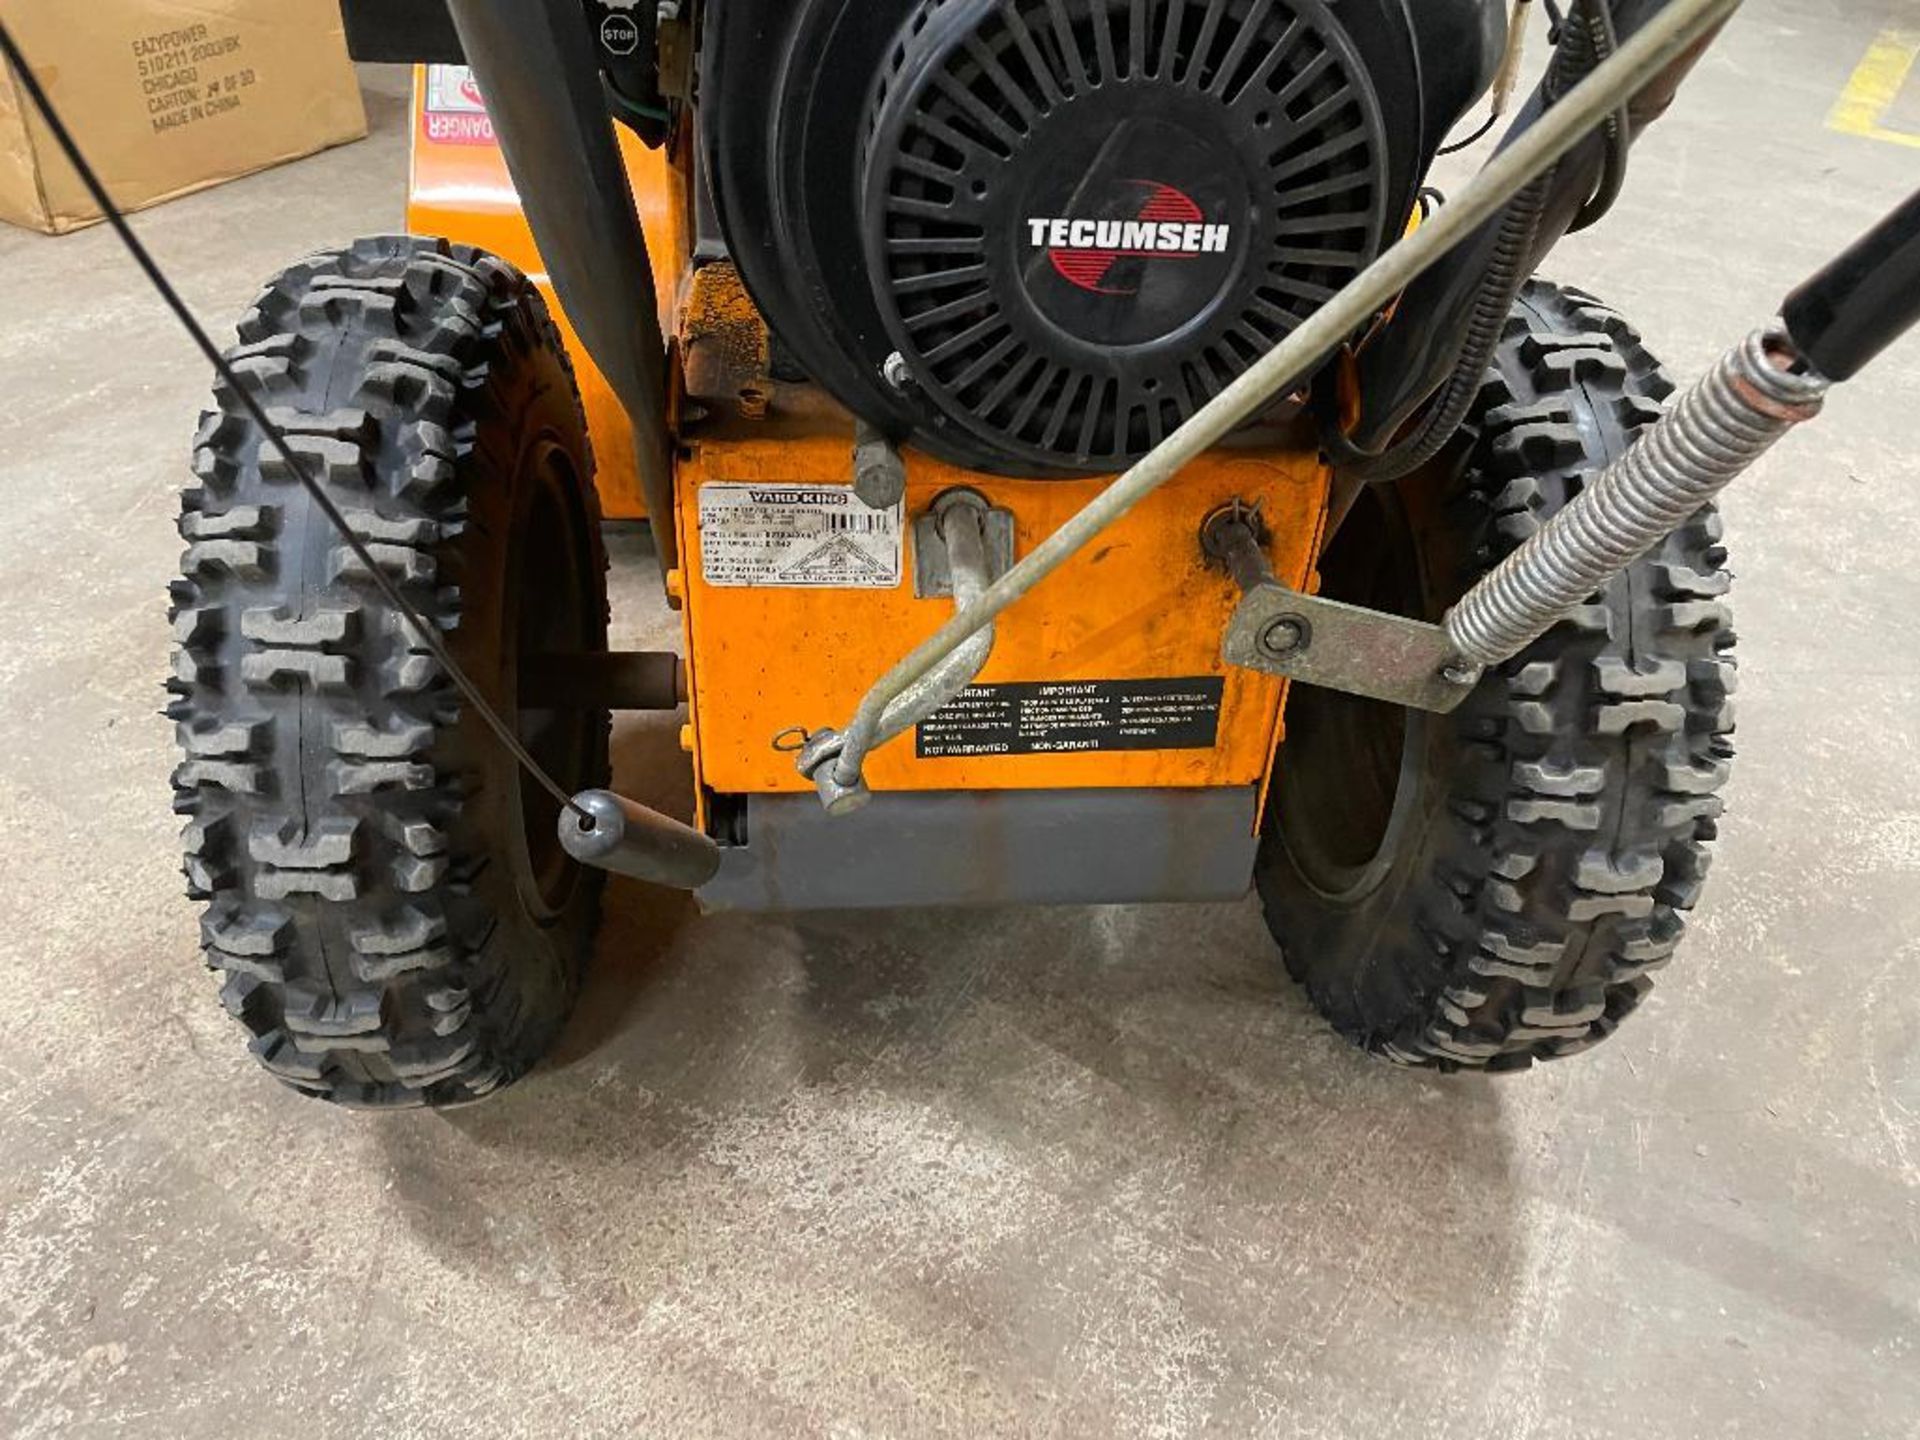 DESCRIPTION YARD KING PERFORMANCE 8HP ELECTRIC START SNOW THROWER ADDITIONAL INFORMATION 8HP, ELECTR - Image 11 of 12